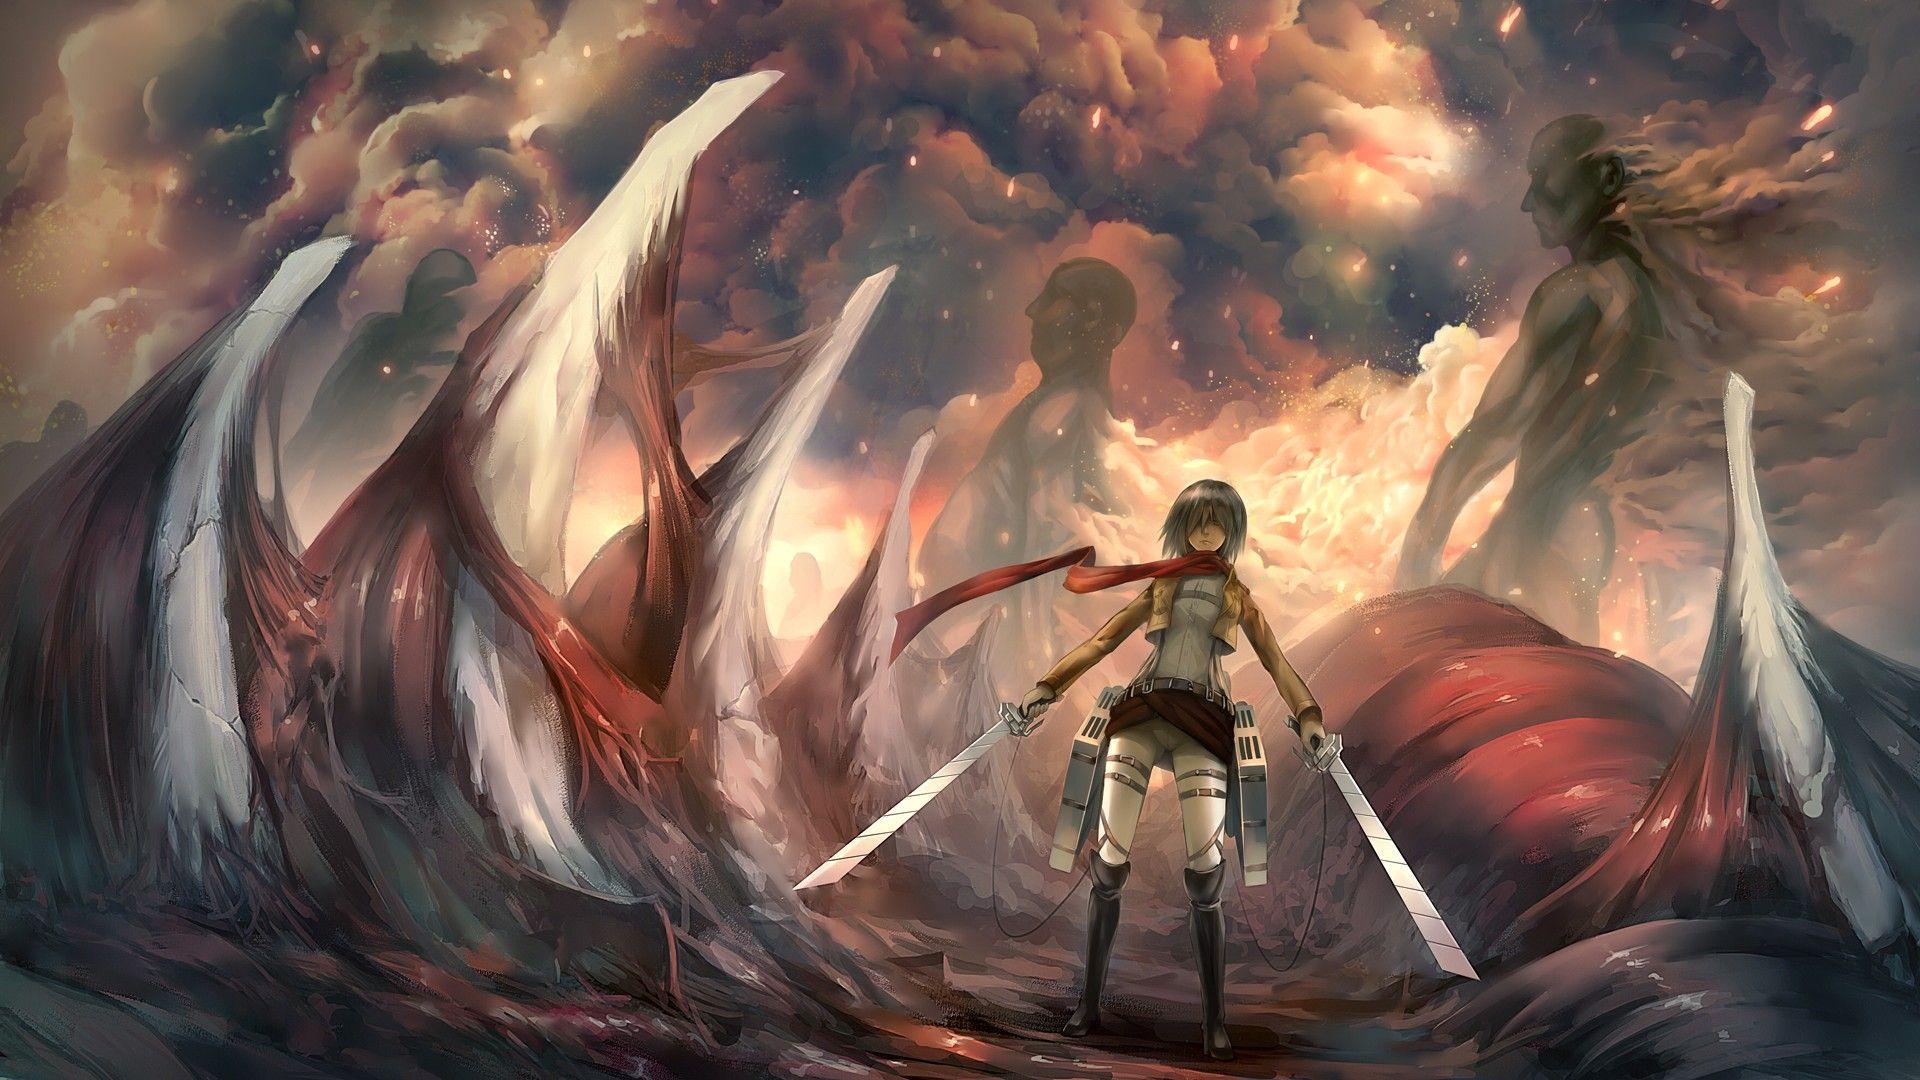 Attack On Titan The Final Season Part 2 Release Date, Recap And Spoilers